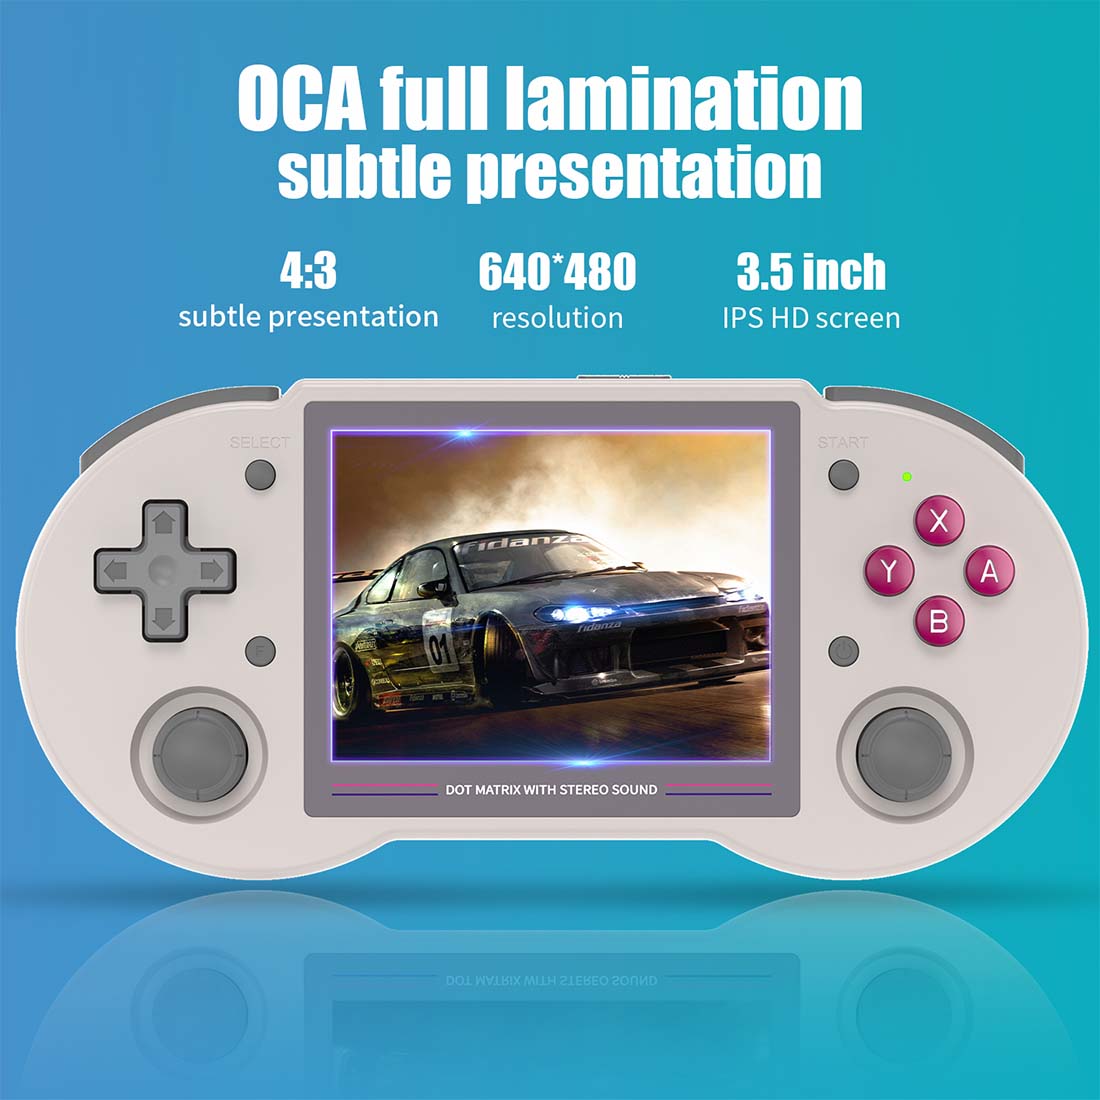 New Portable Anbernic RG405M Handheld Game Console 4.0 Inch Touch Screen  Android 12 Retro Video Game Consoles Player Kids Gift